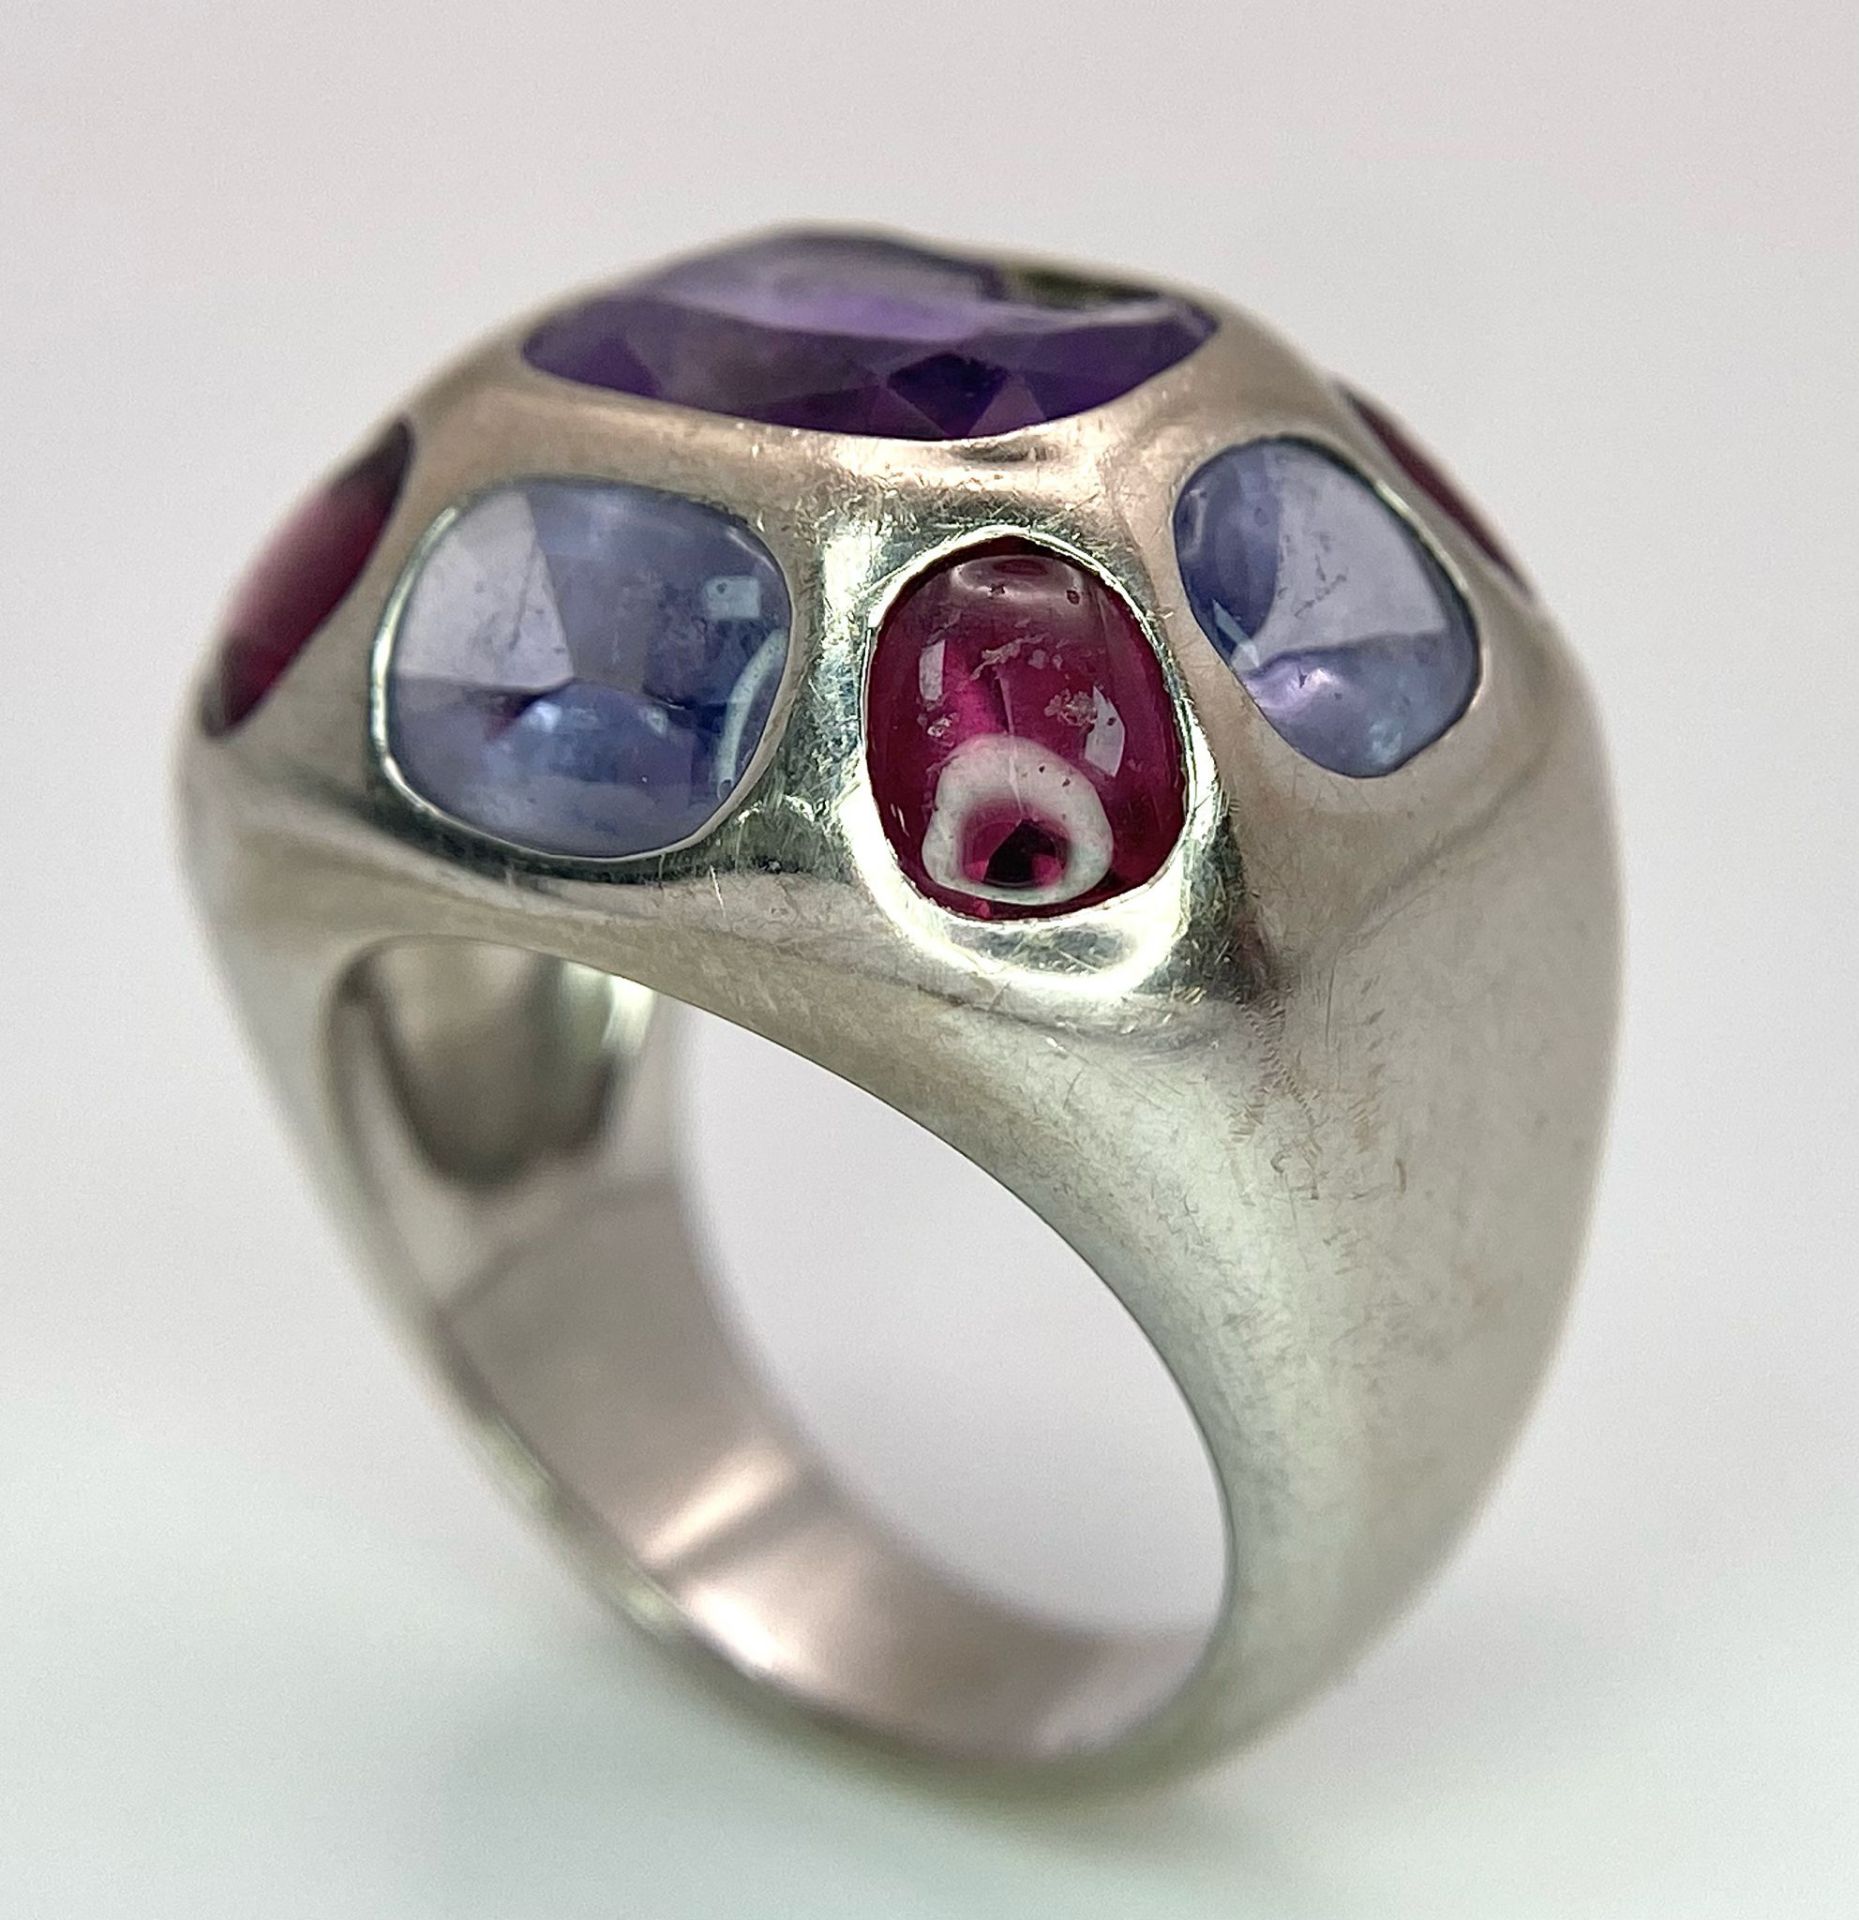 A Chanel Designer 18K White Gold and Amethyst and Garnet Ring. Rectangular cut central amethyst with - Image 9 of 13